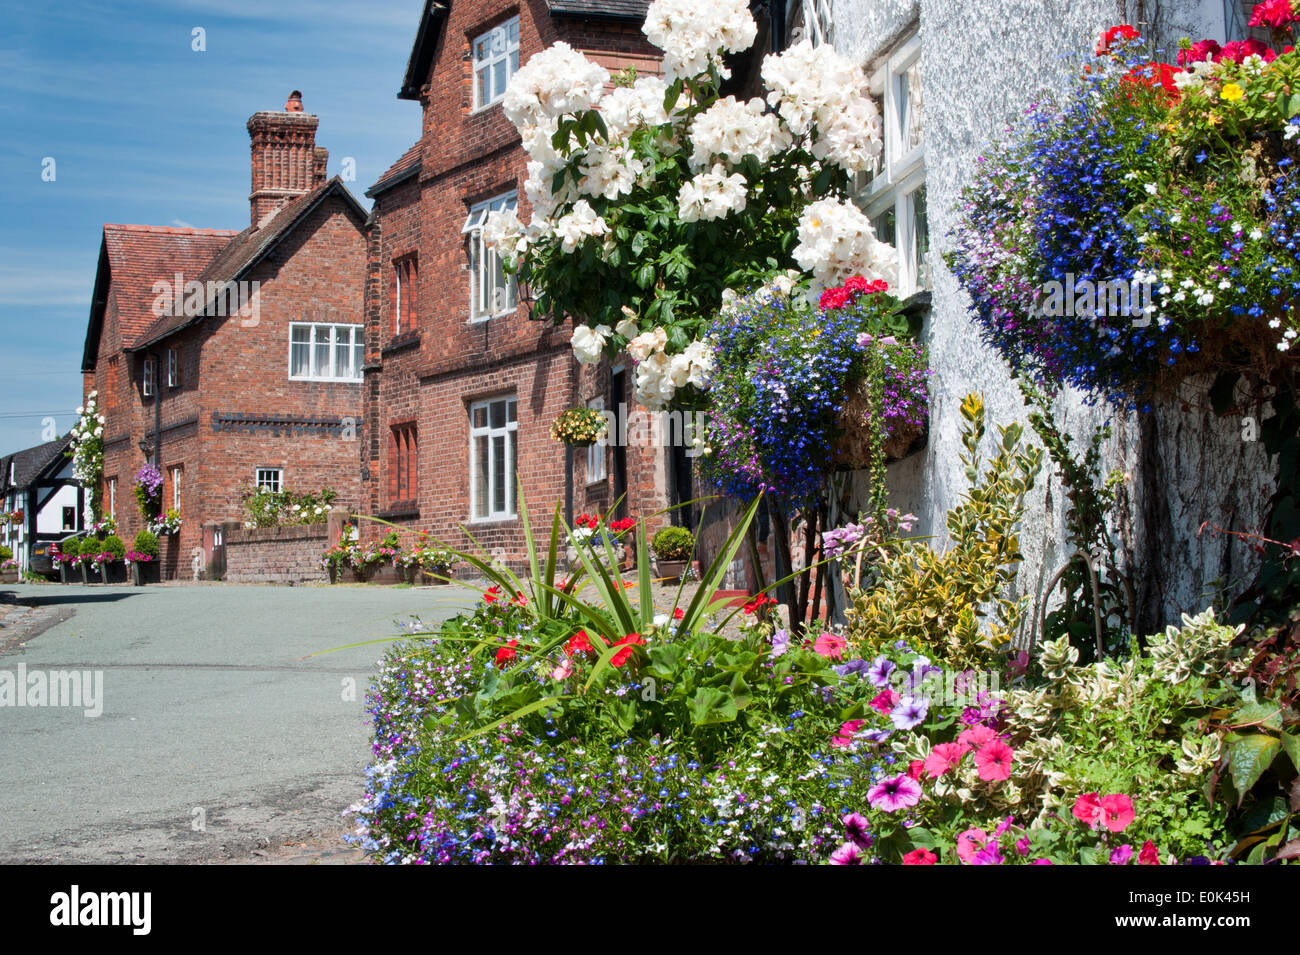 Summer in Great Budworth, Great Budworth, Cheshire, England, UK Stock Photo